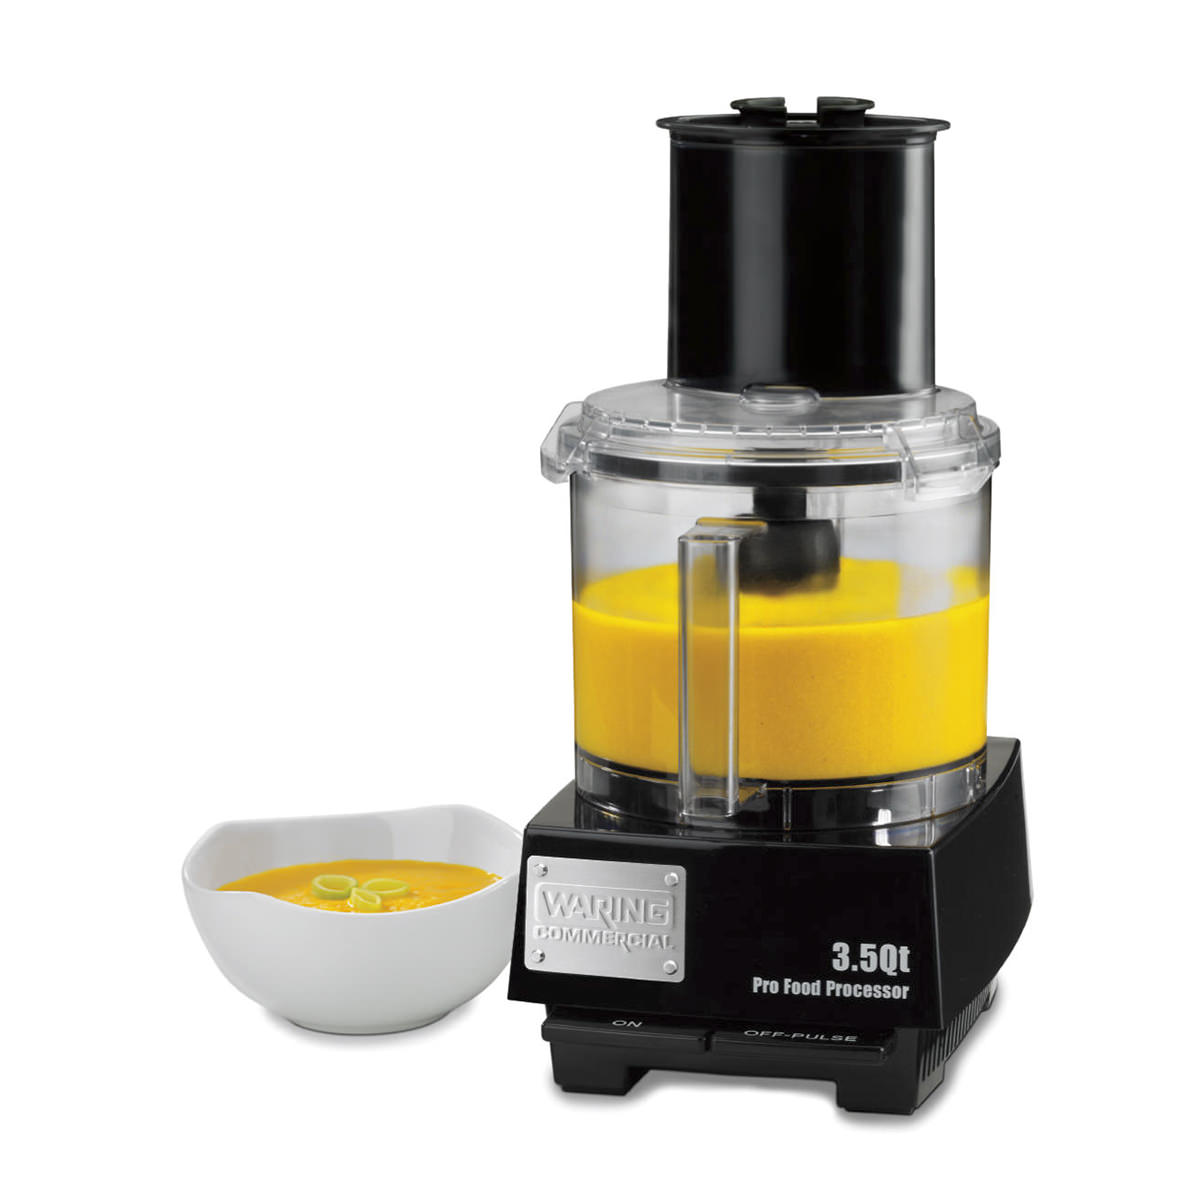 Waring Commercial 2.5 qt Food Processor With Polycarbonate Bowl - 14 1/4L  x 10 3/4W x 18 1/2H